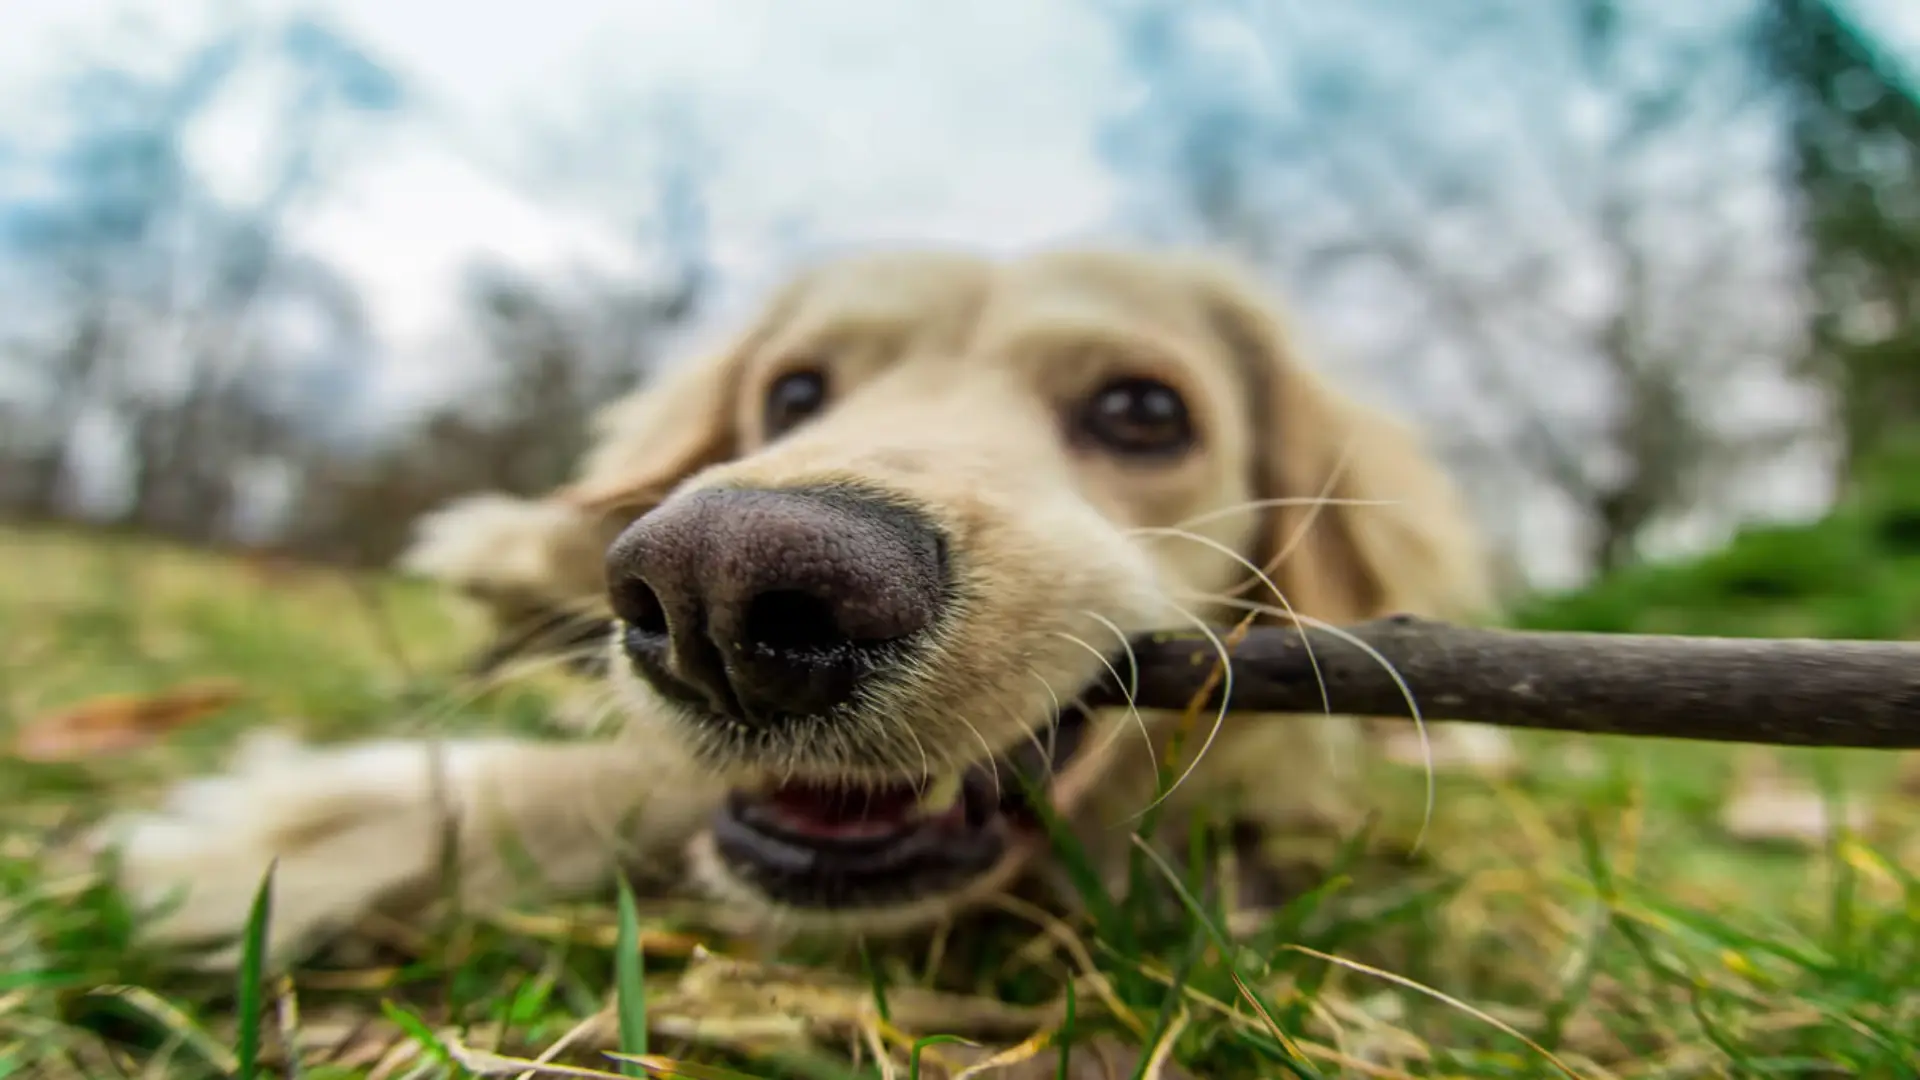 Study: dogs’ sense of smell, vision linked by unique brain structures